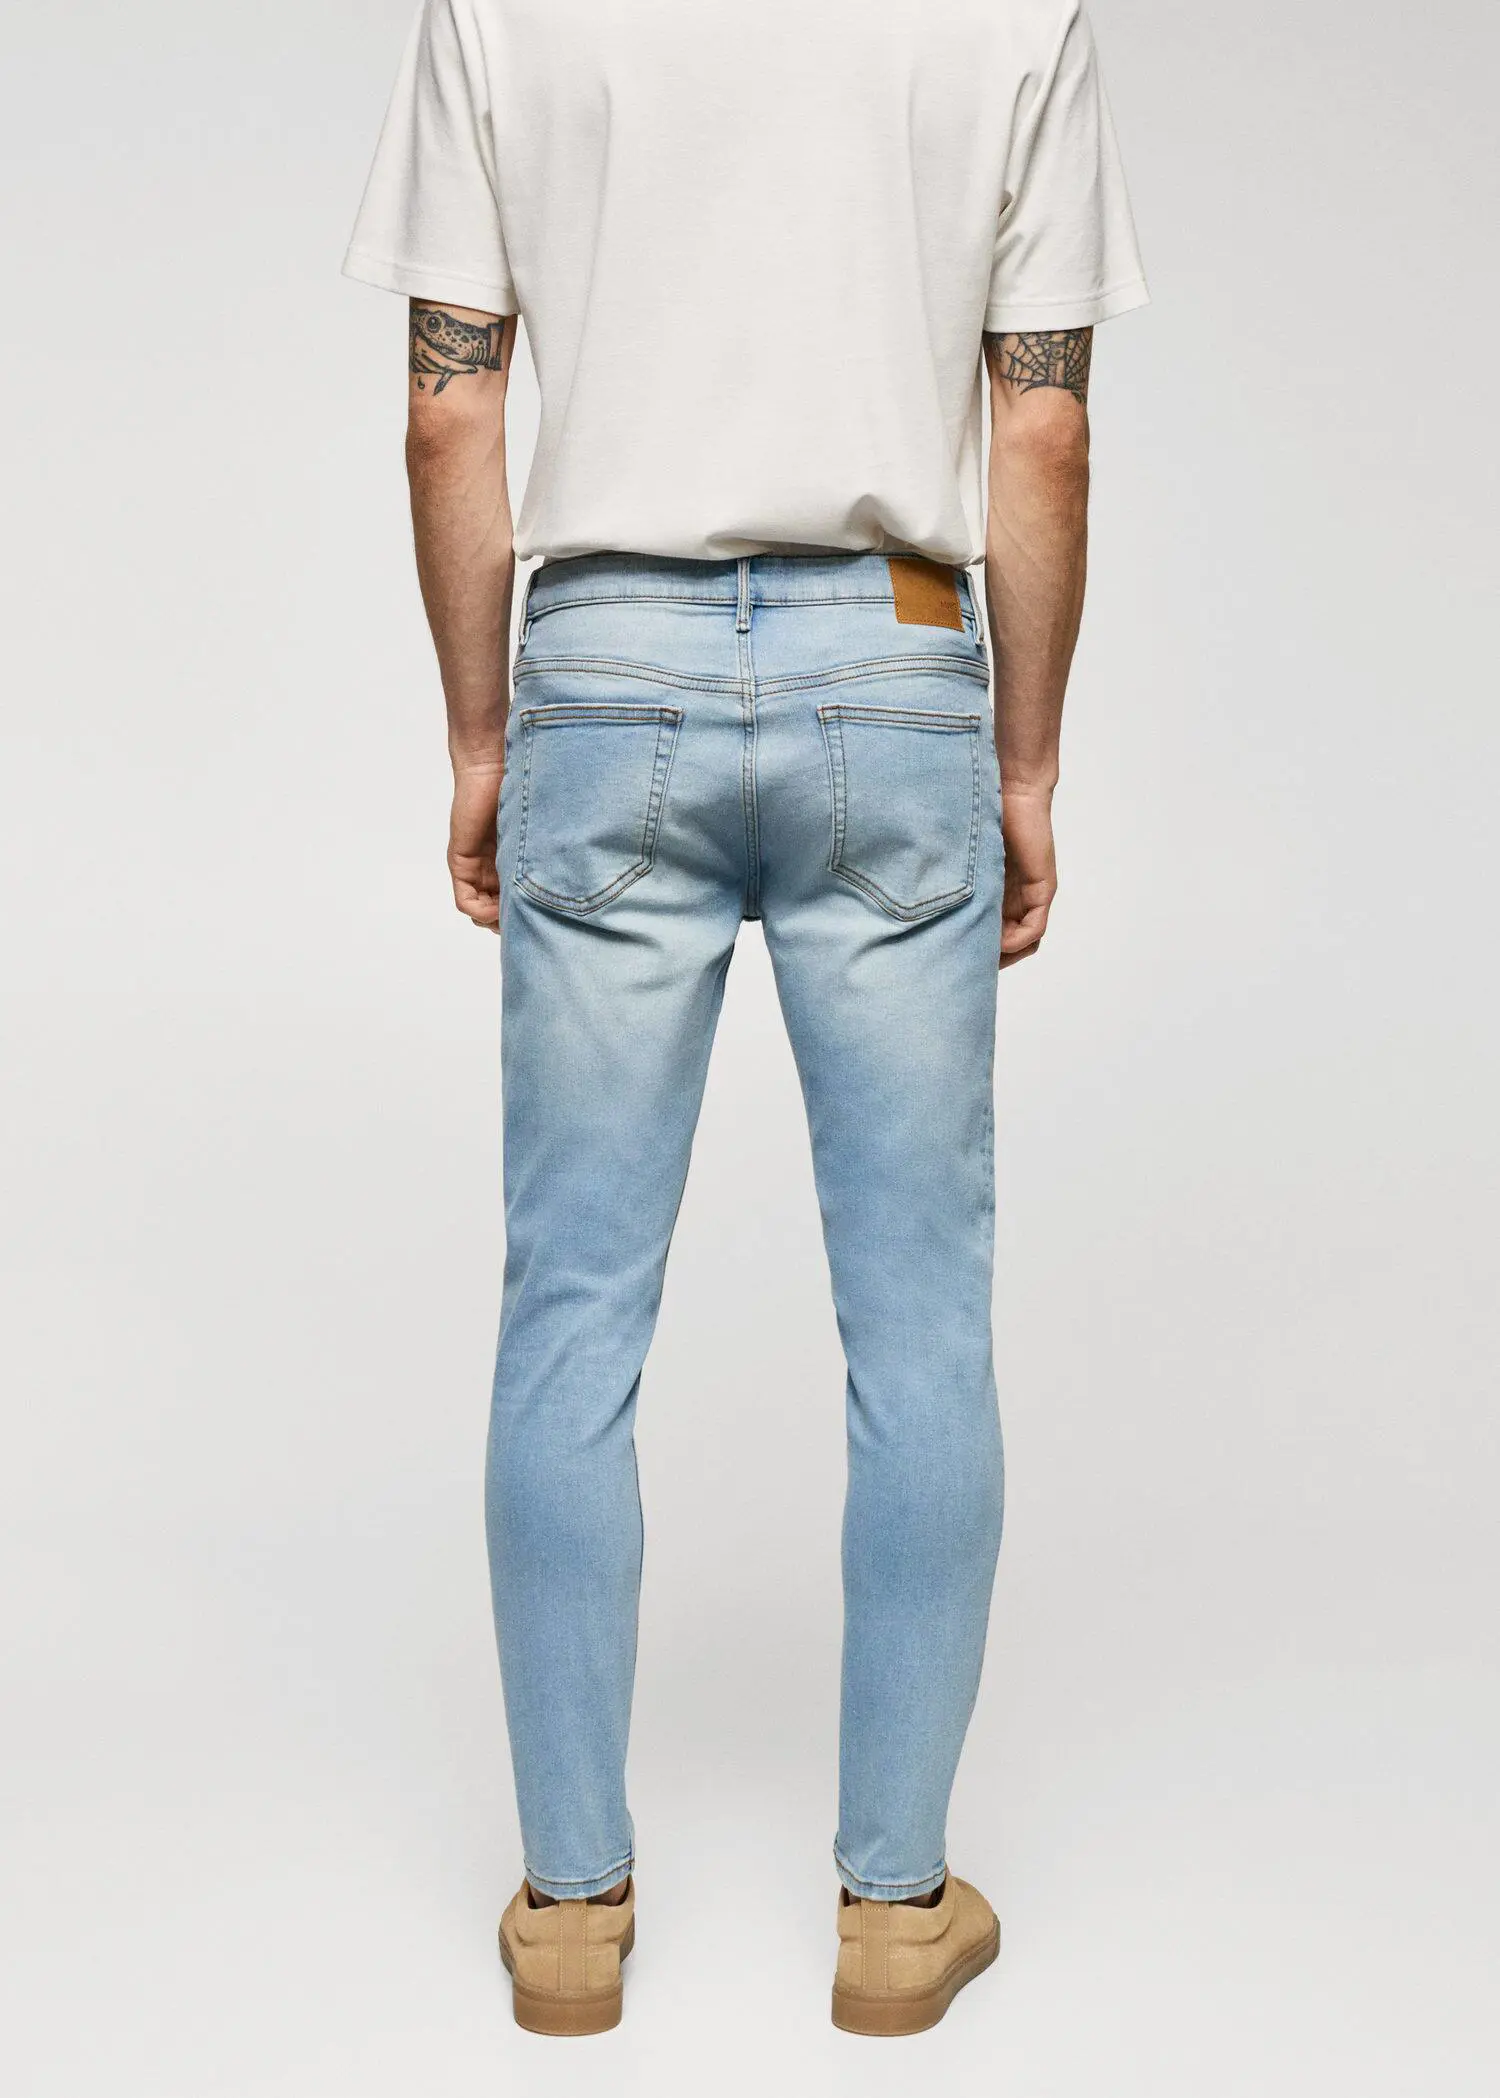 Mango Jude skinny-fit jeans. a person wearing light blue jeans and a white shirt. 